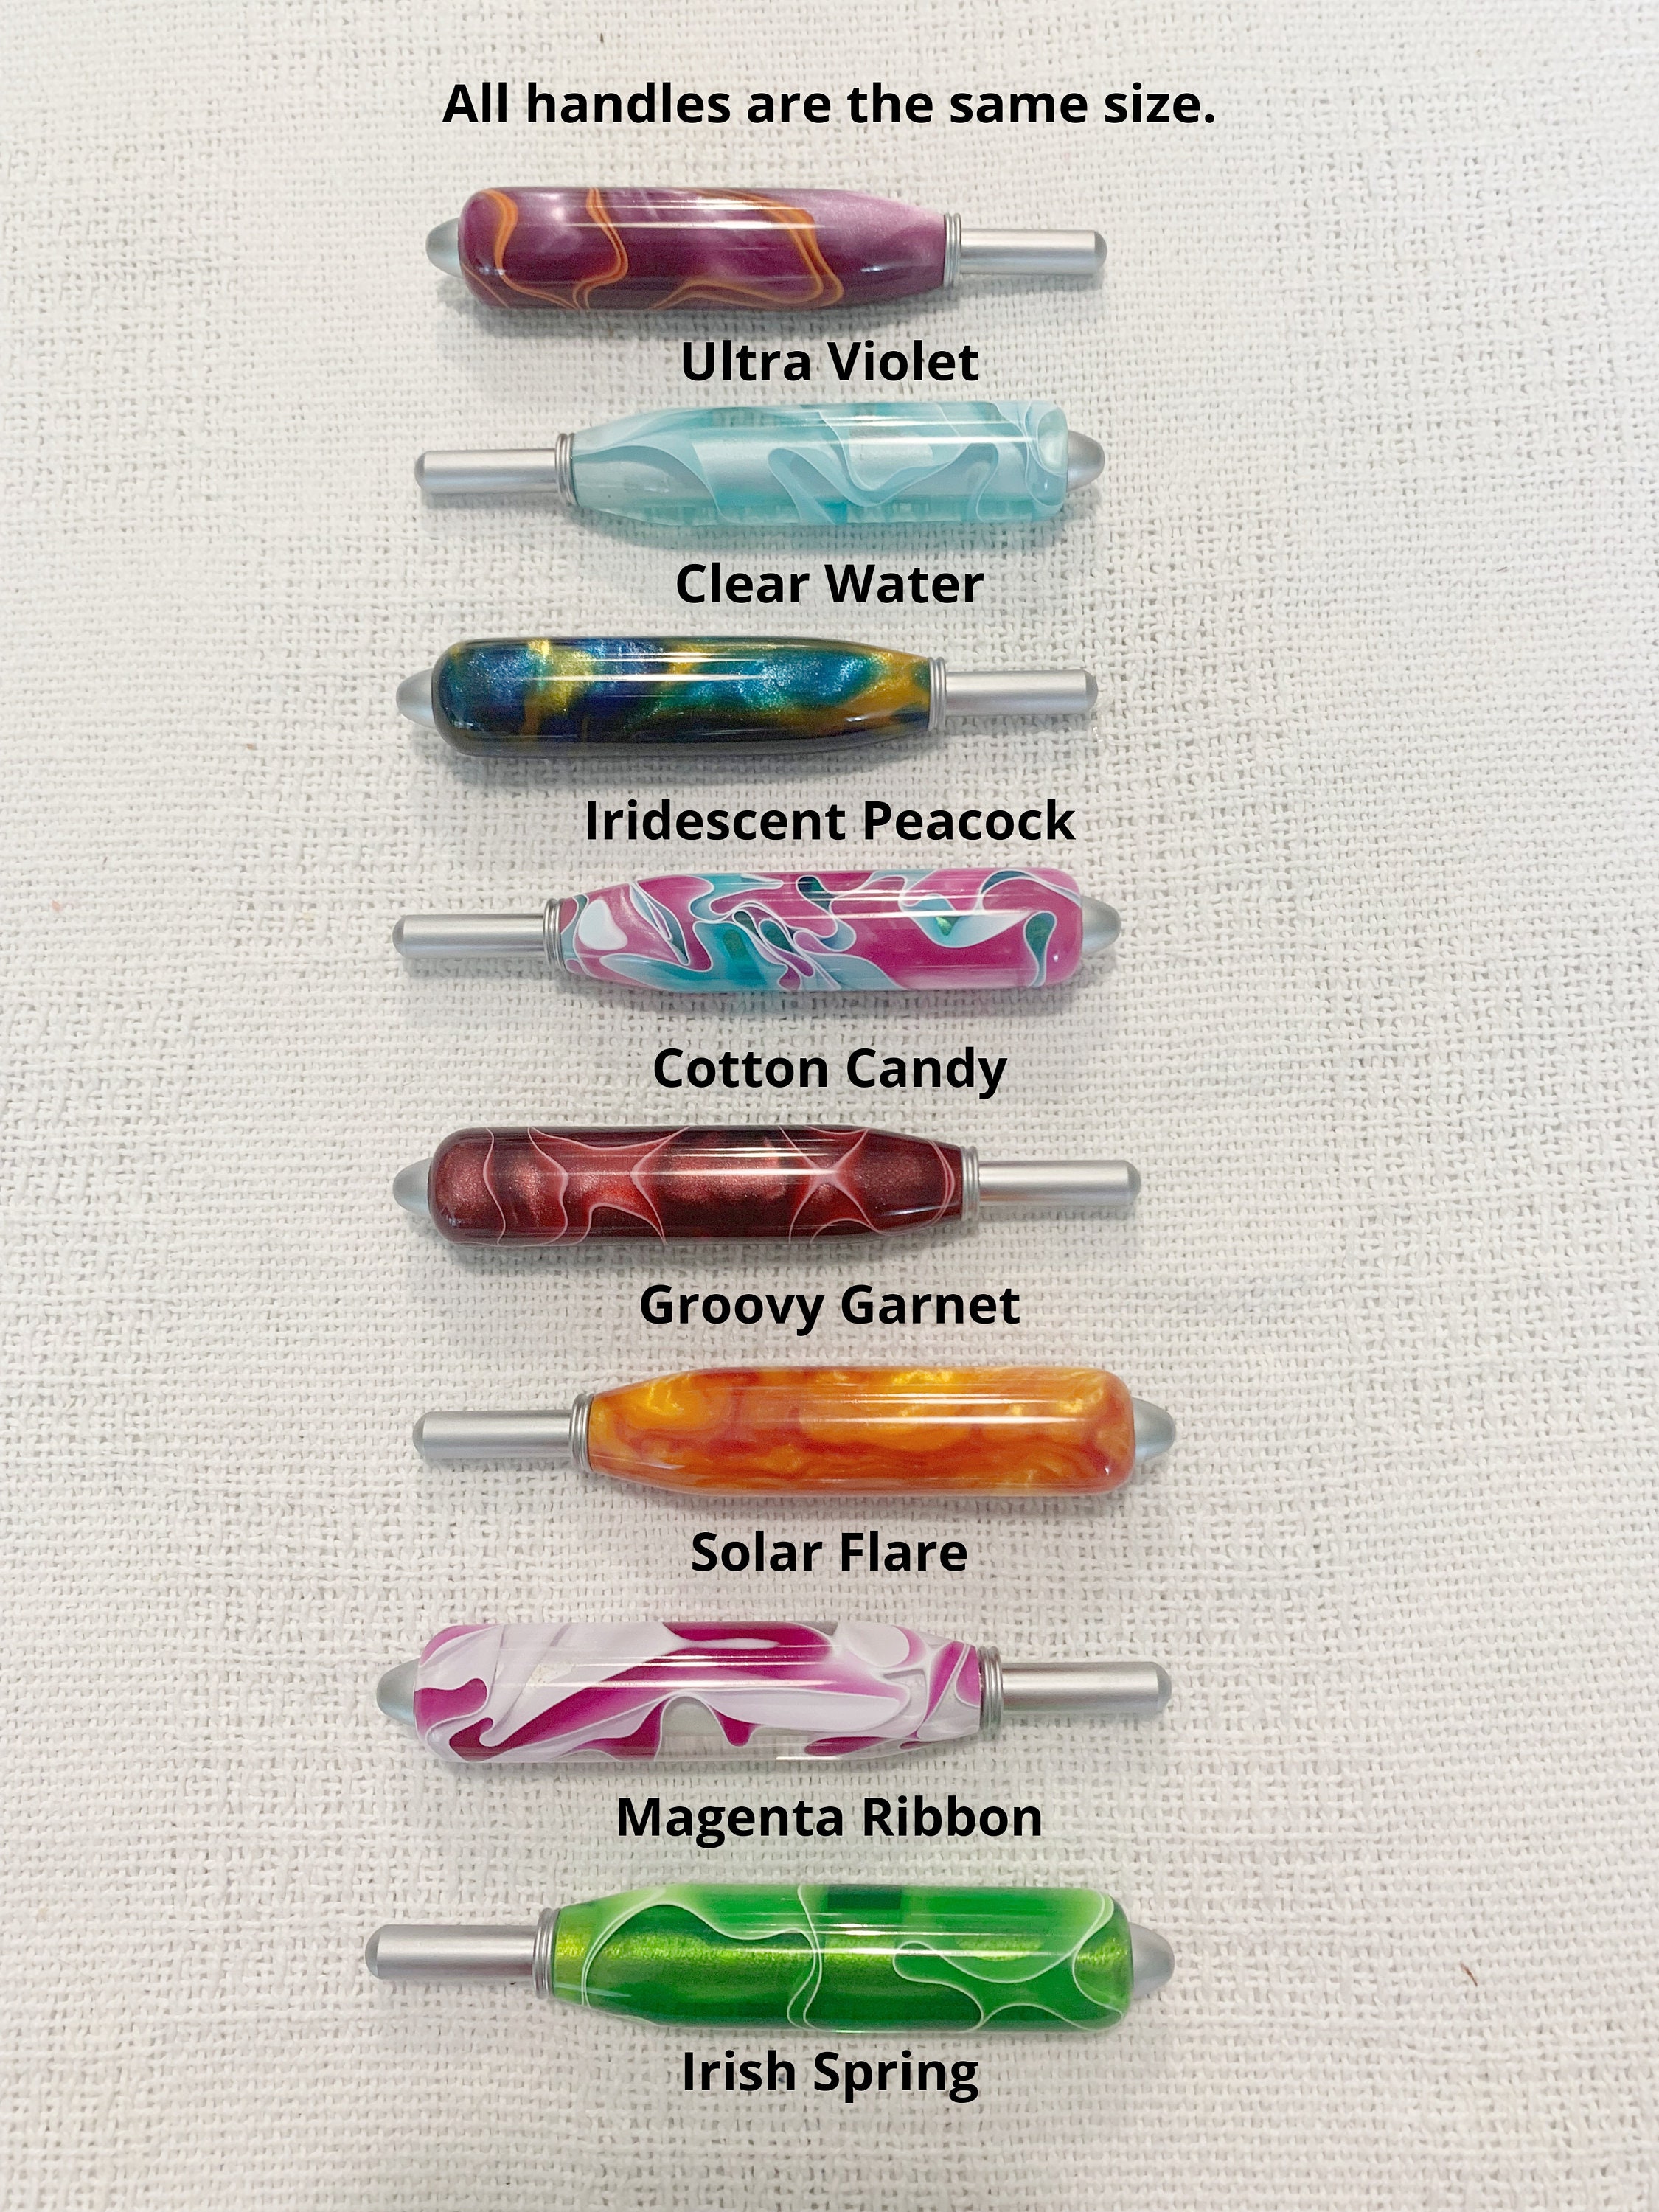 Candy Shop Crochet Hooks: Choose from Sizes F, G, H and I